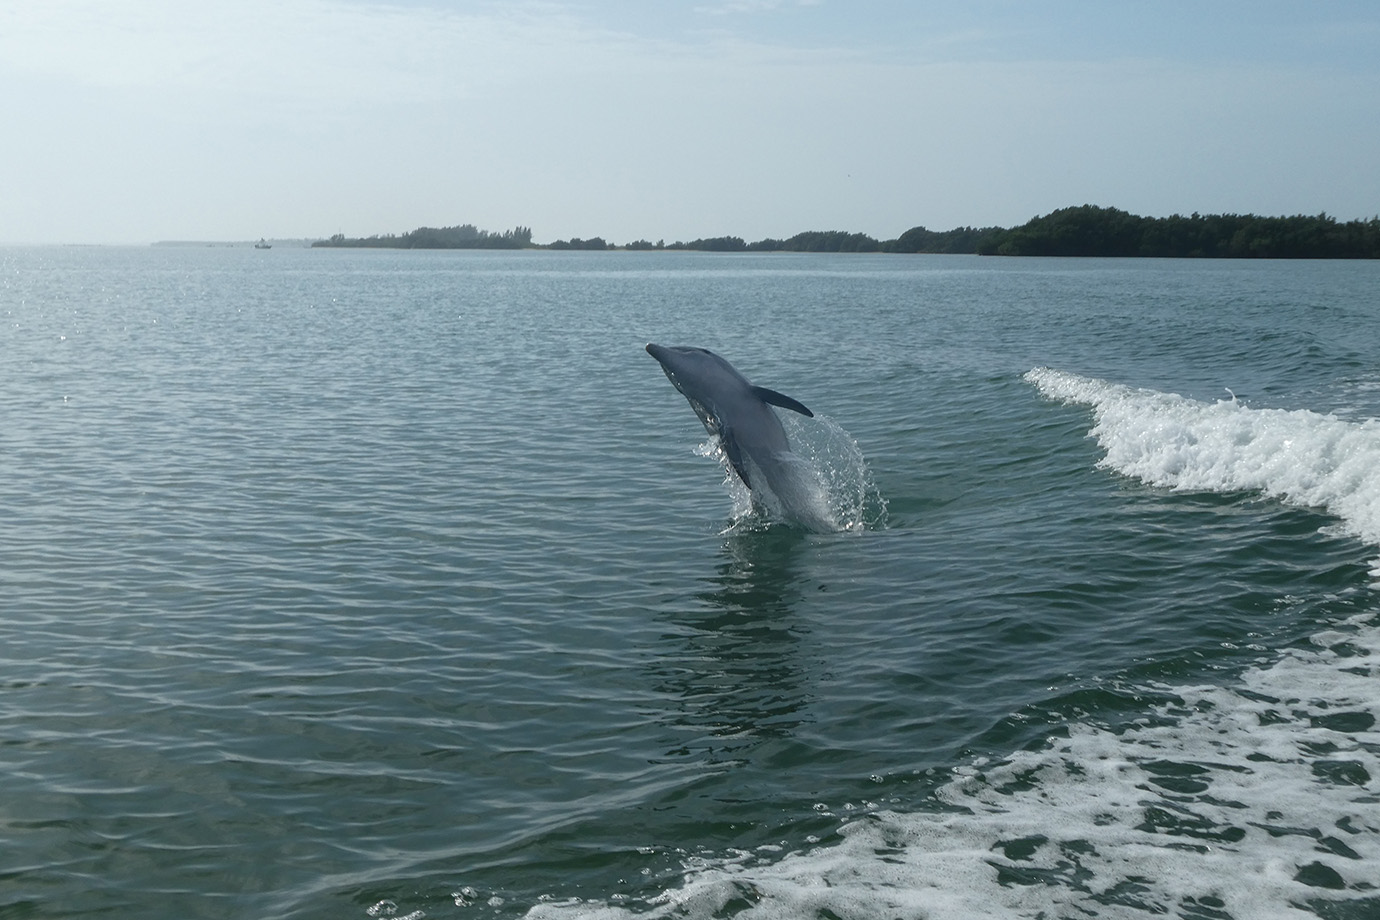 Dolphin breaching out of the water in Captiva Island, FL